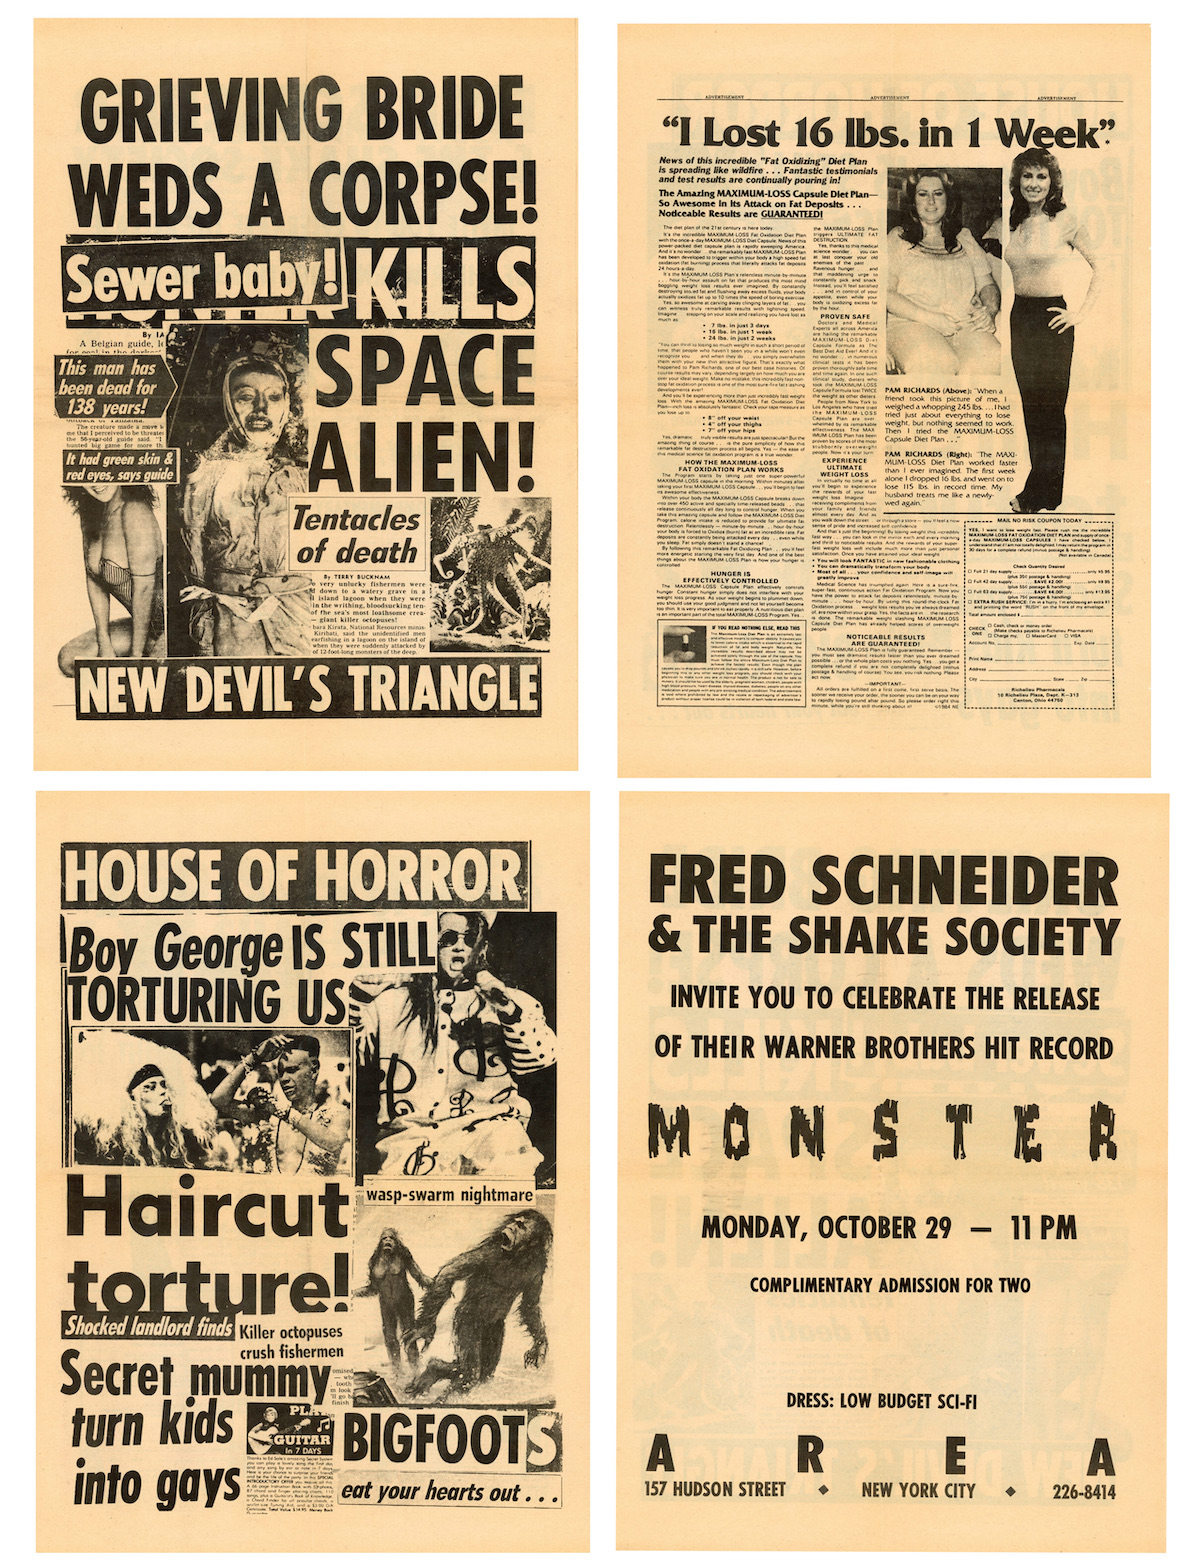 AREA Nightclub, Fred Schneider & The Shake Society invite you to Celebrate the Release of Their Record “Monster,” Satirical 4-Page Folded Newspaper, October 29, 1984